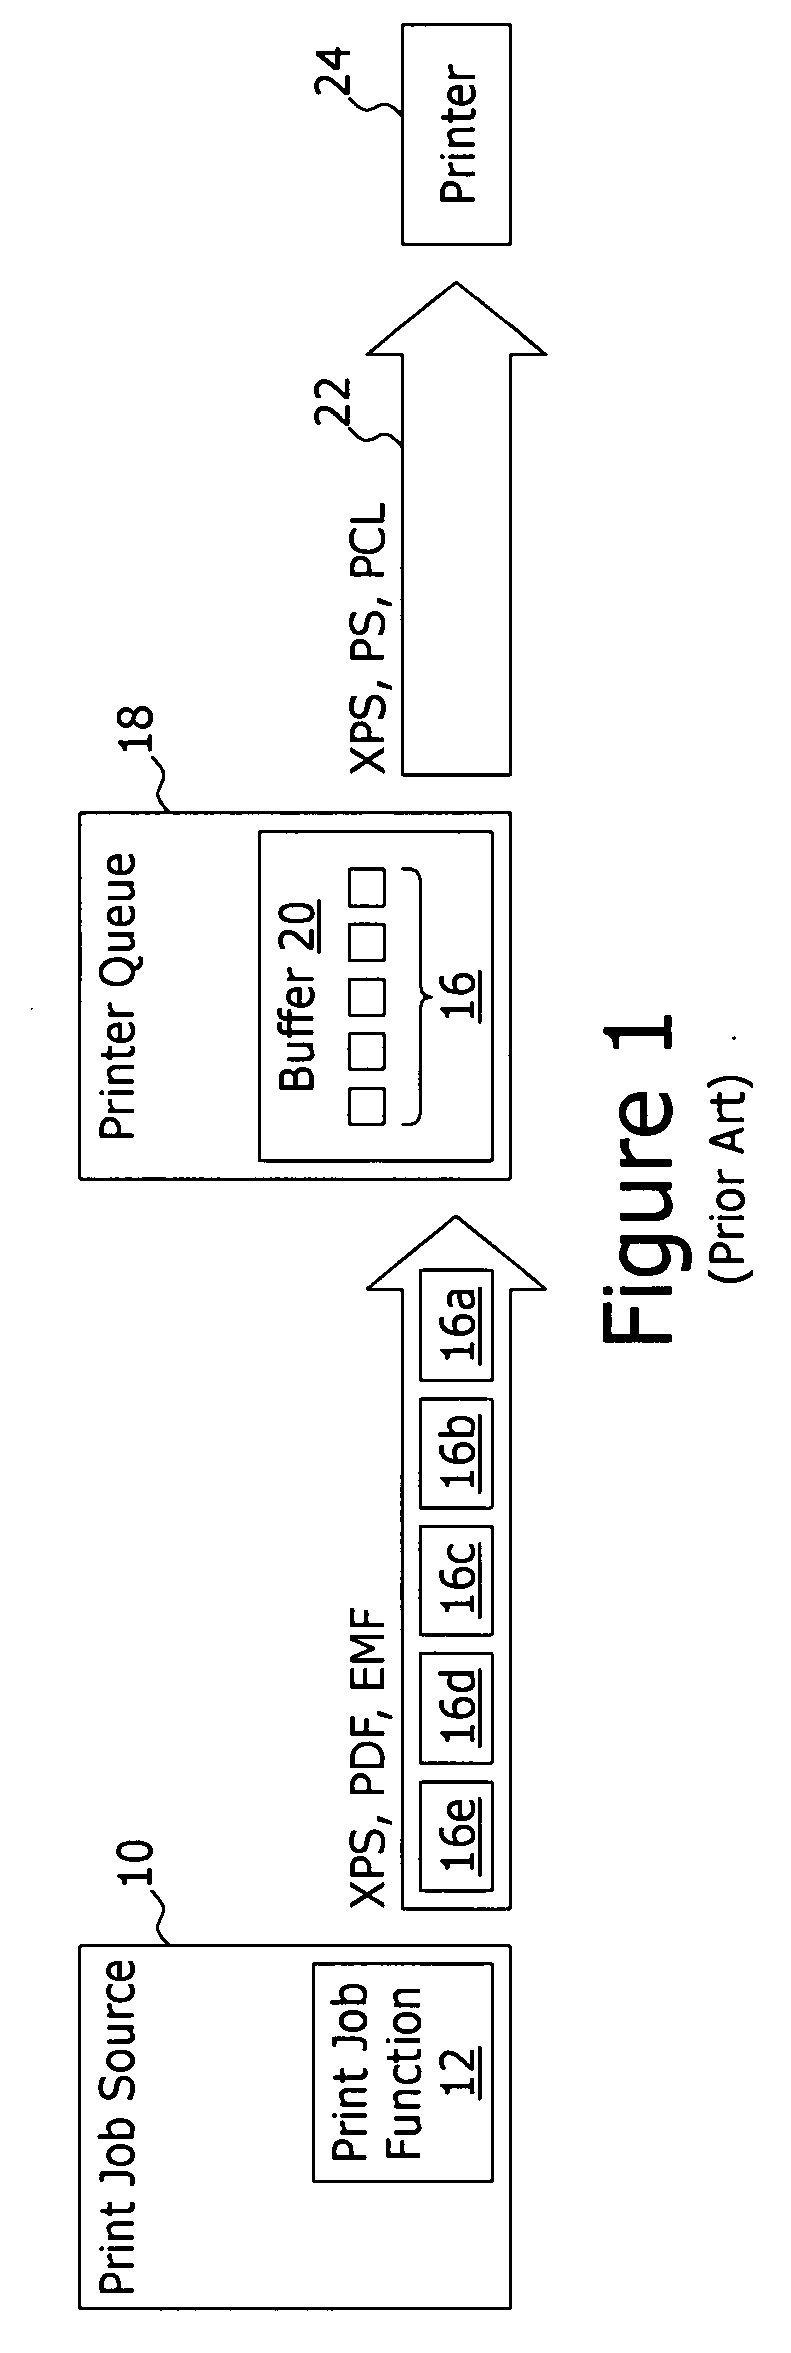 System and method for transferring a portion of a document print sequence output by a print job source to an automated data processing system